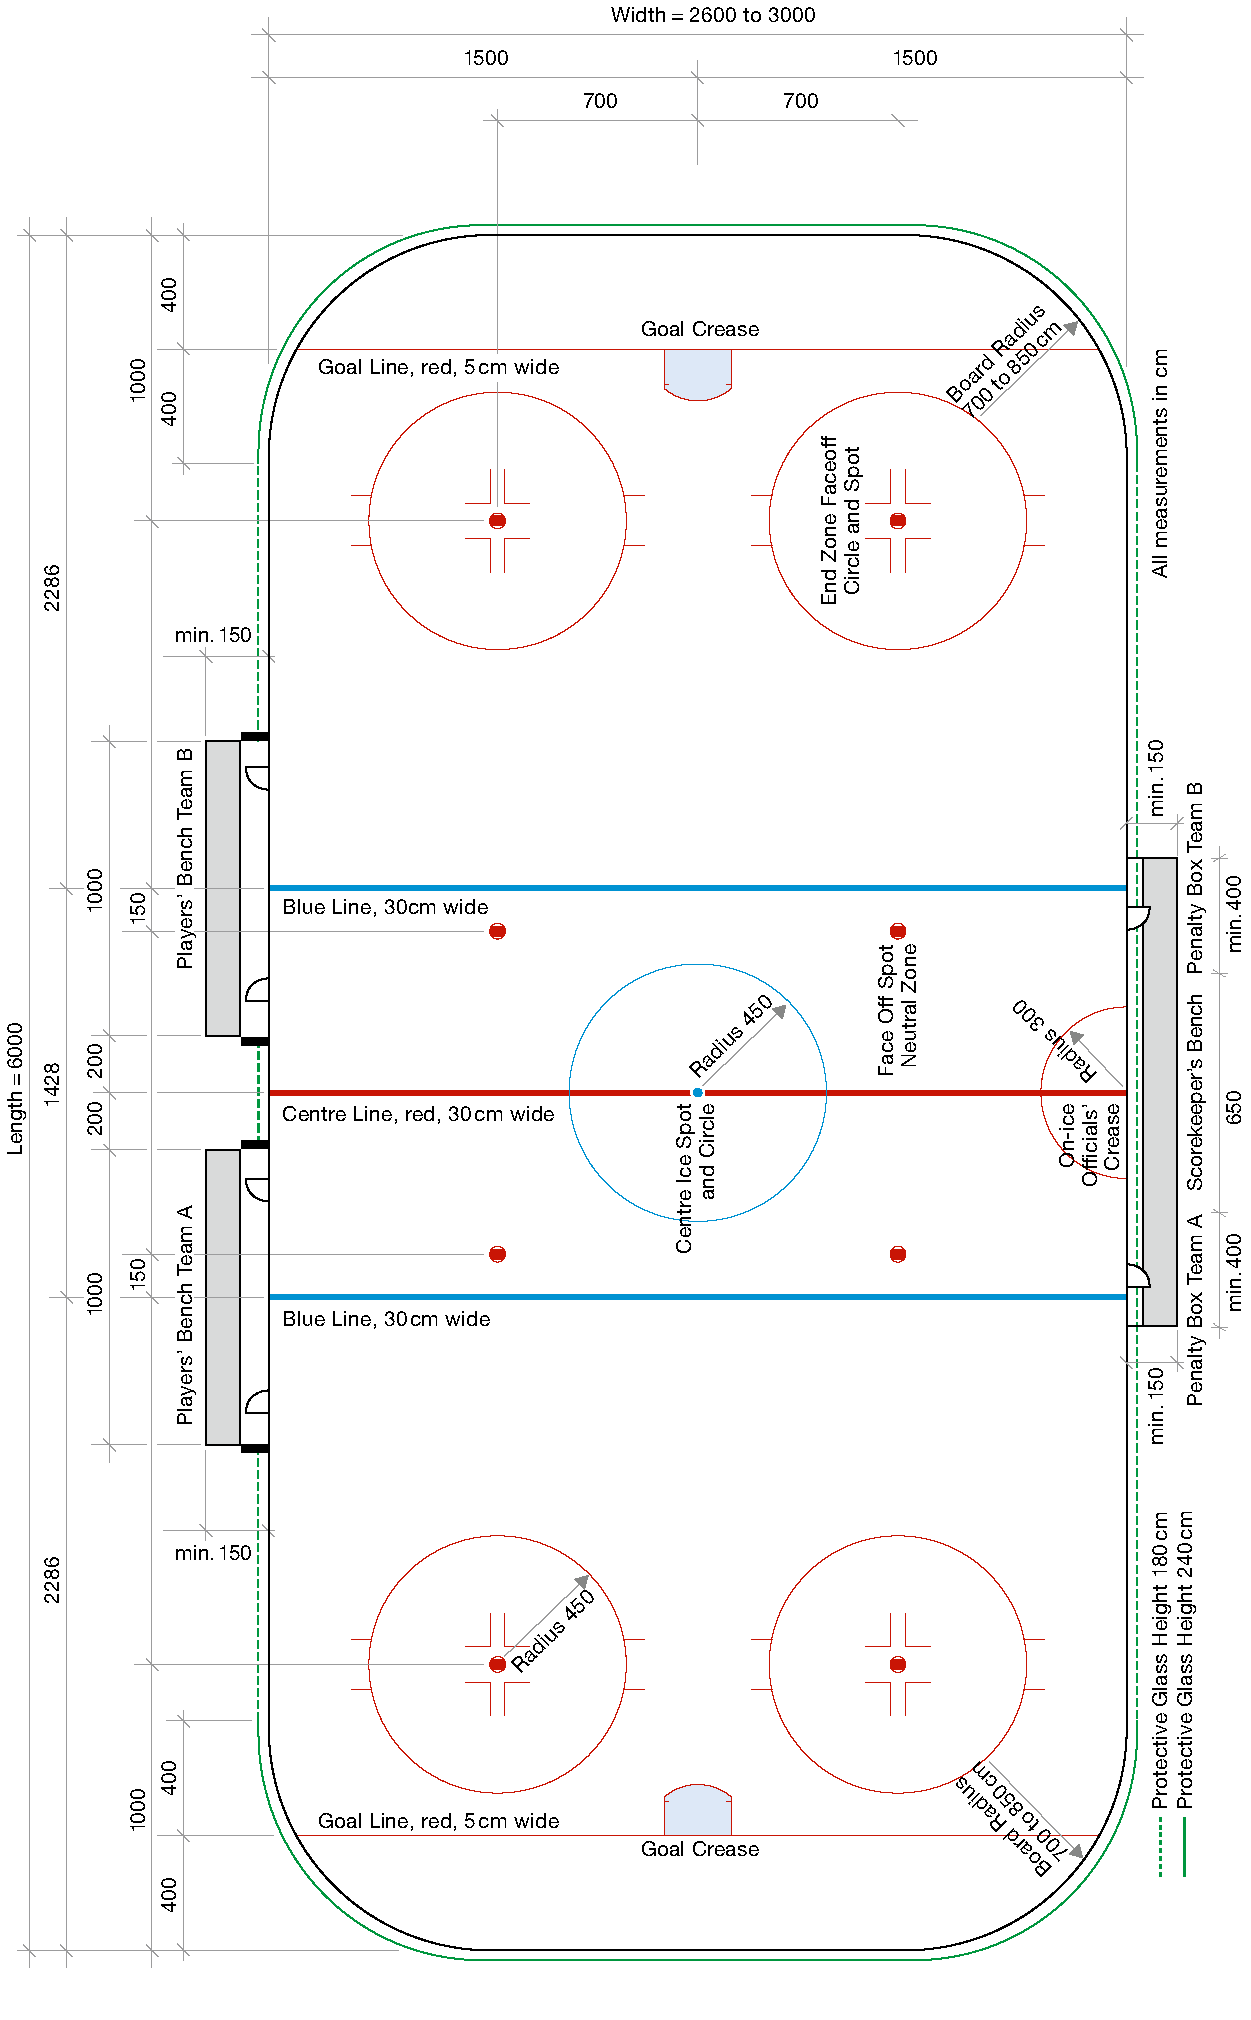 Standard dimensions of rink